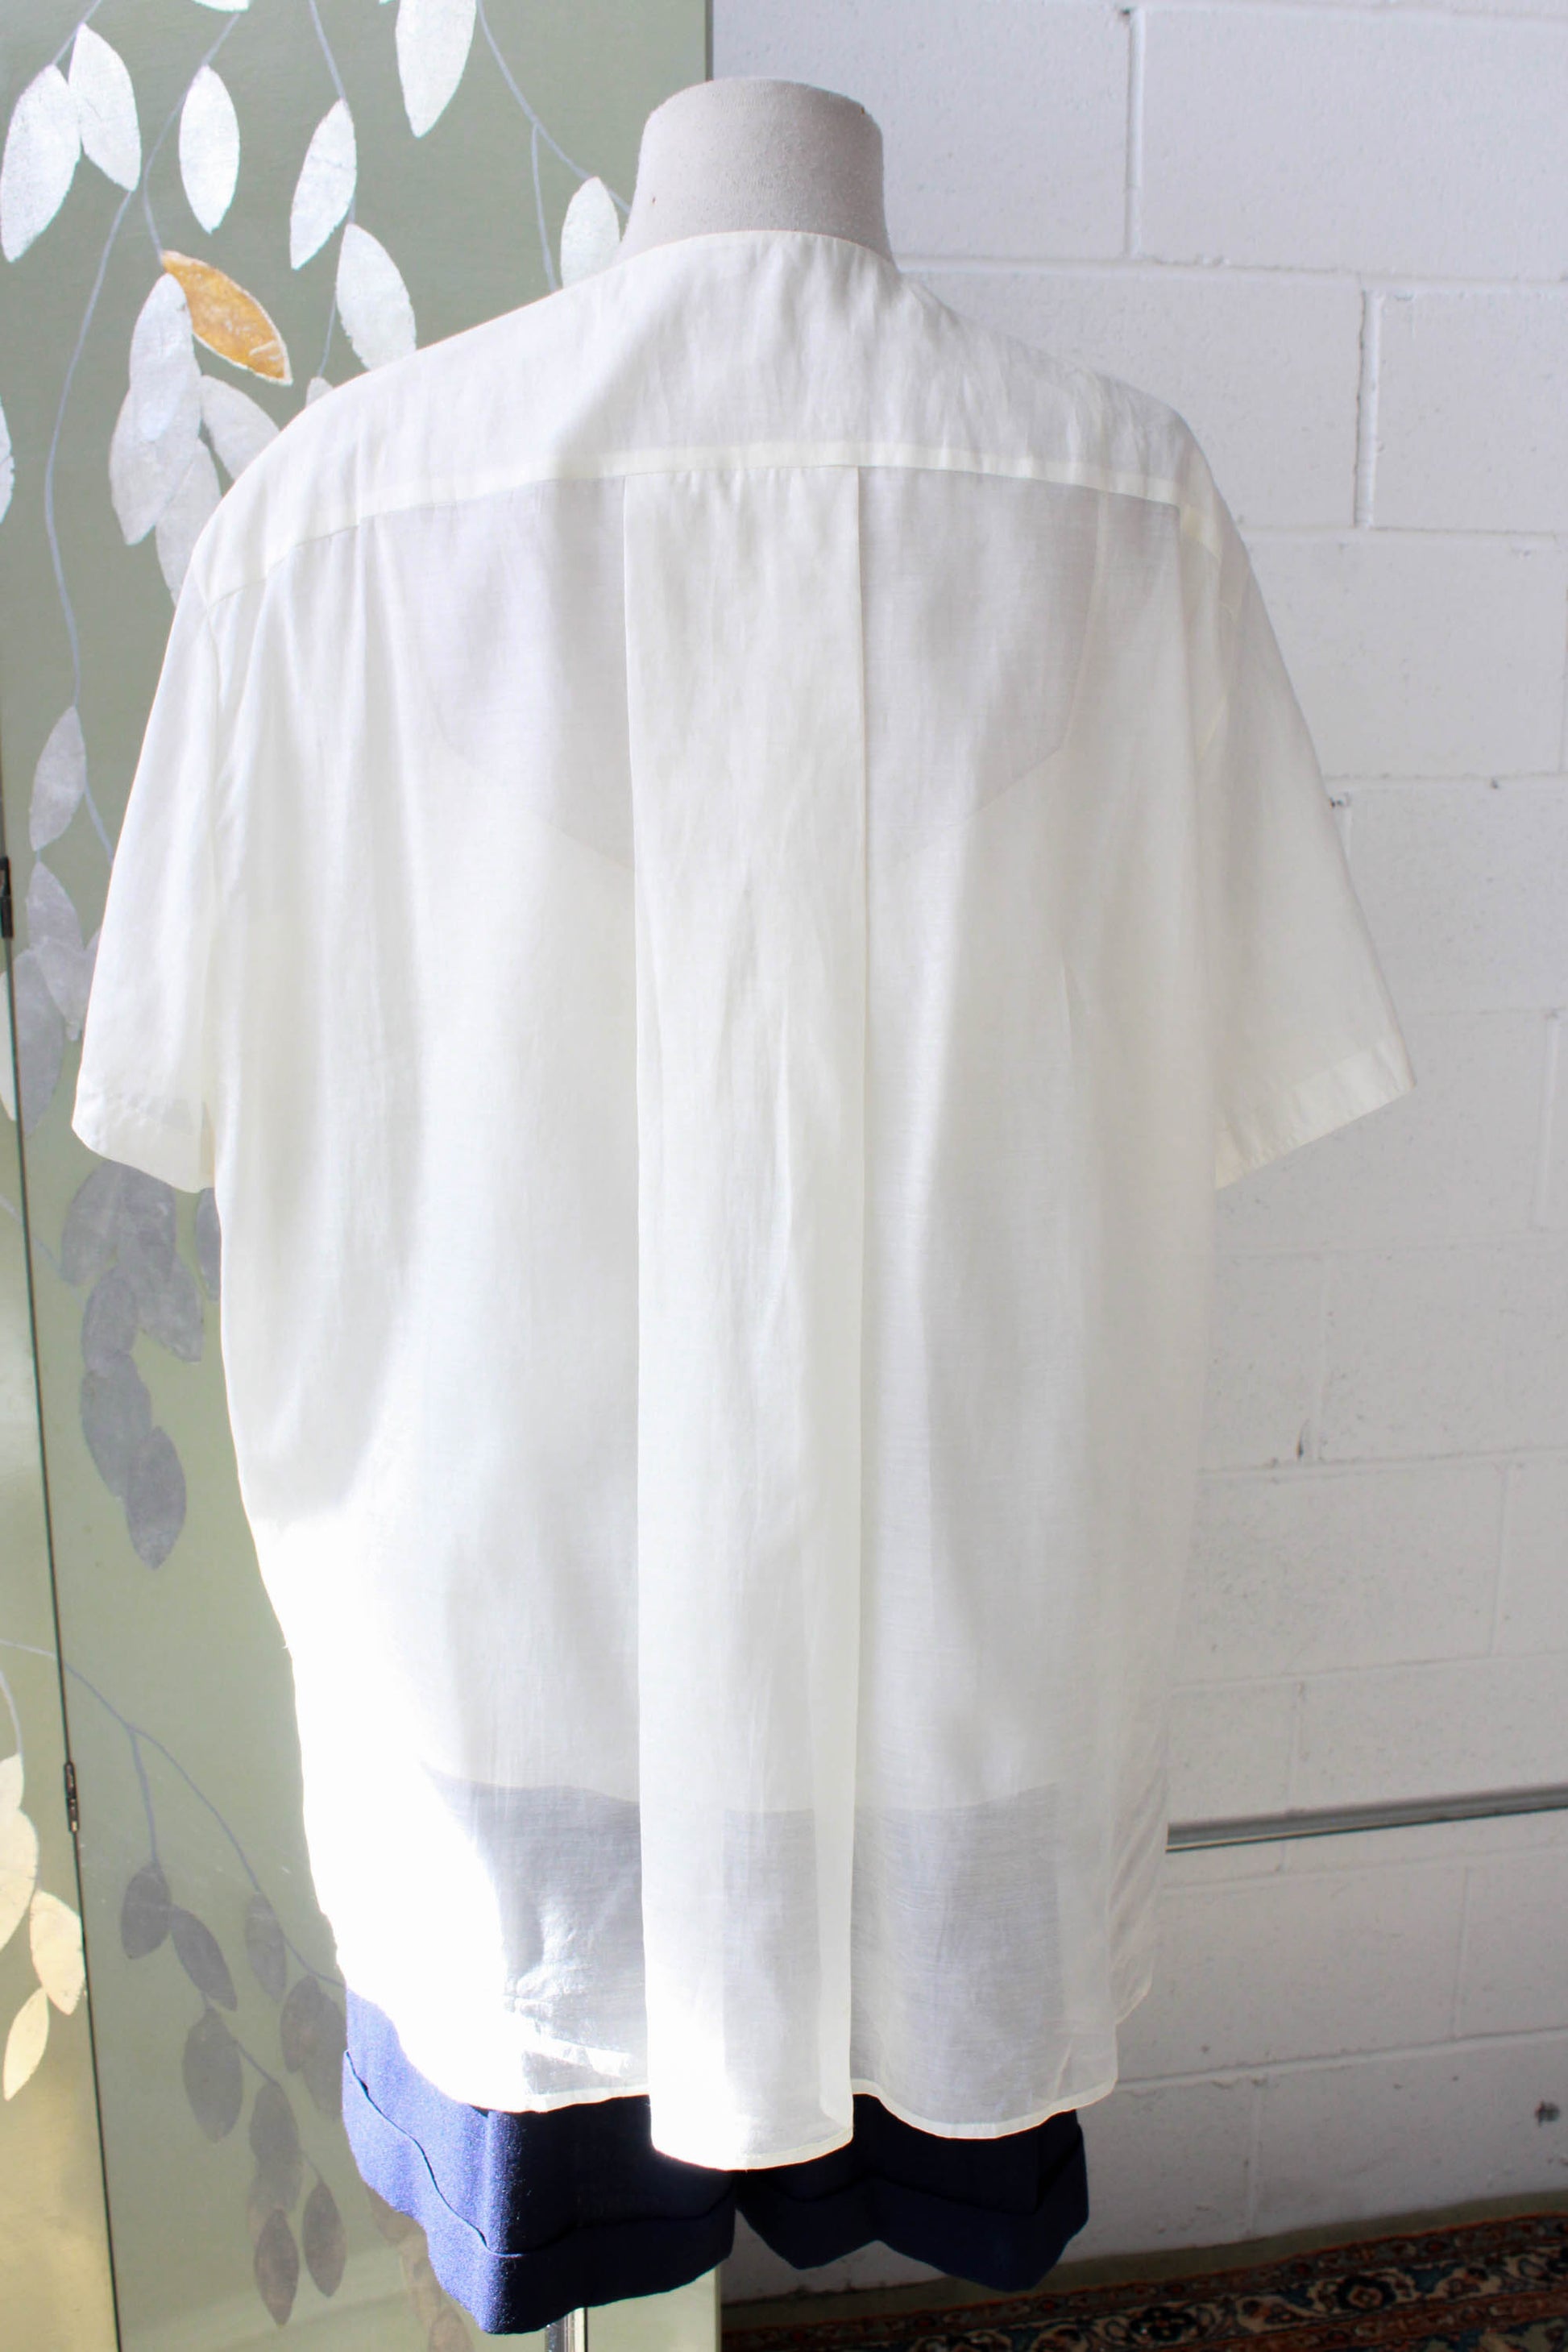 The Row Silk Button Up Shirt, Collarless, Short Sleeves, Pleated Front Design Minimalist Designer White Blouse